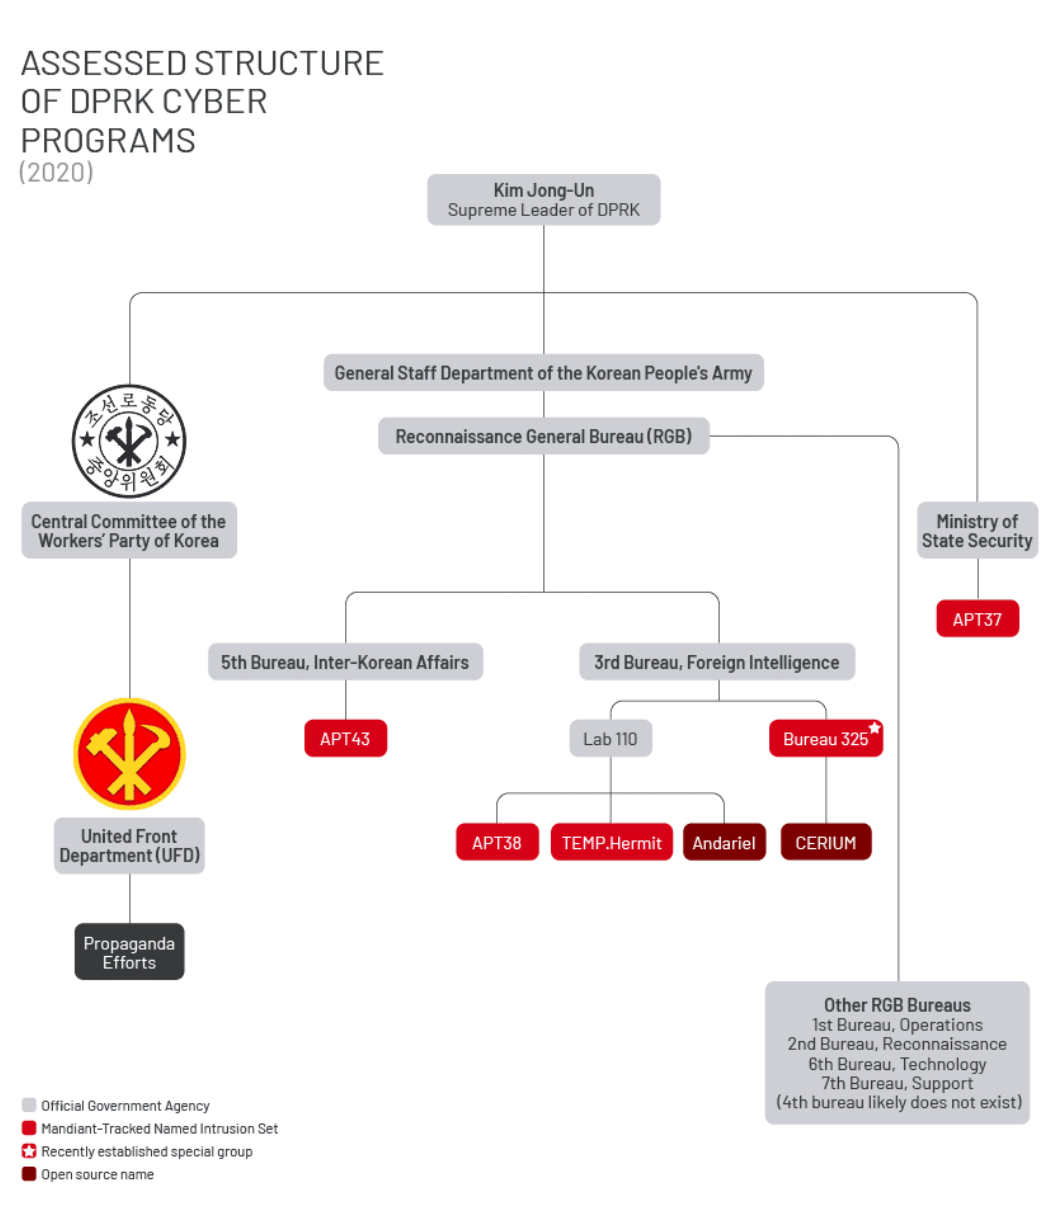 Previously assessed DPRK cyber organizational chart for 2020 by Mandiant.